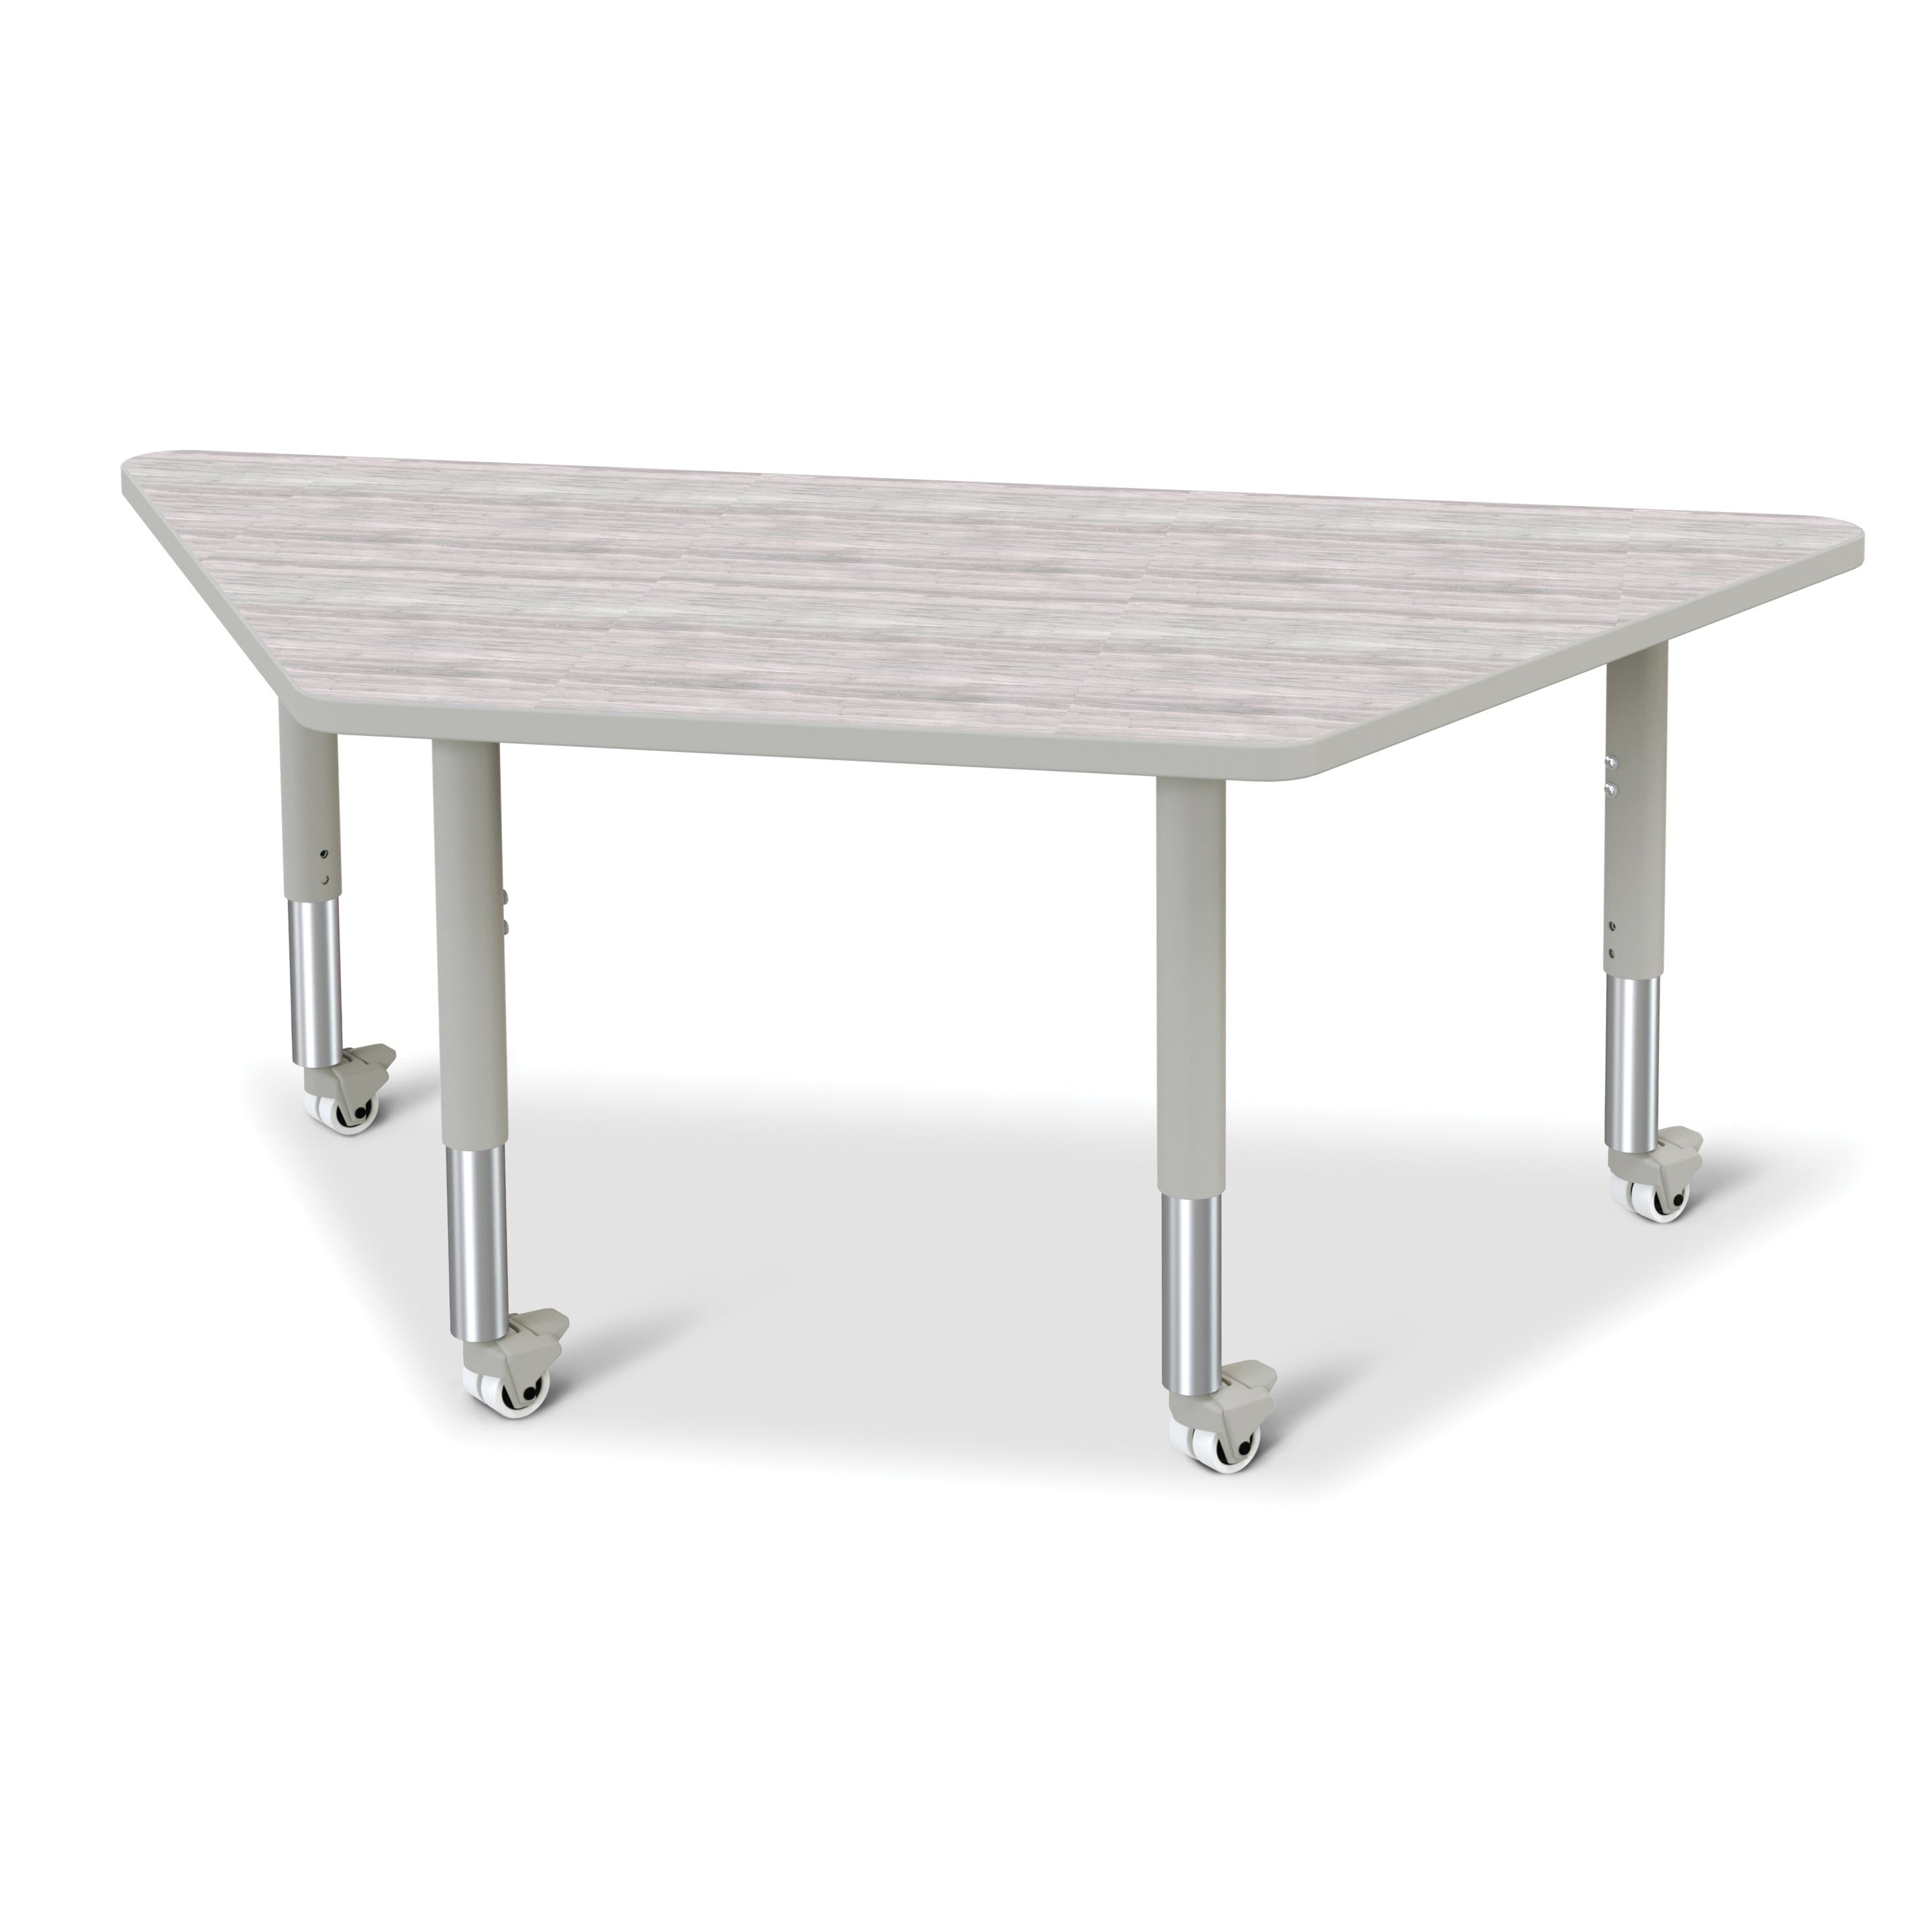 6443JCM450, Berries Trapezoid Activity Table - 30" X 60", Mobile - Driftwood Gray/Gray/Gray